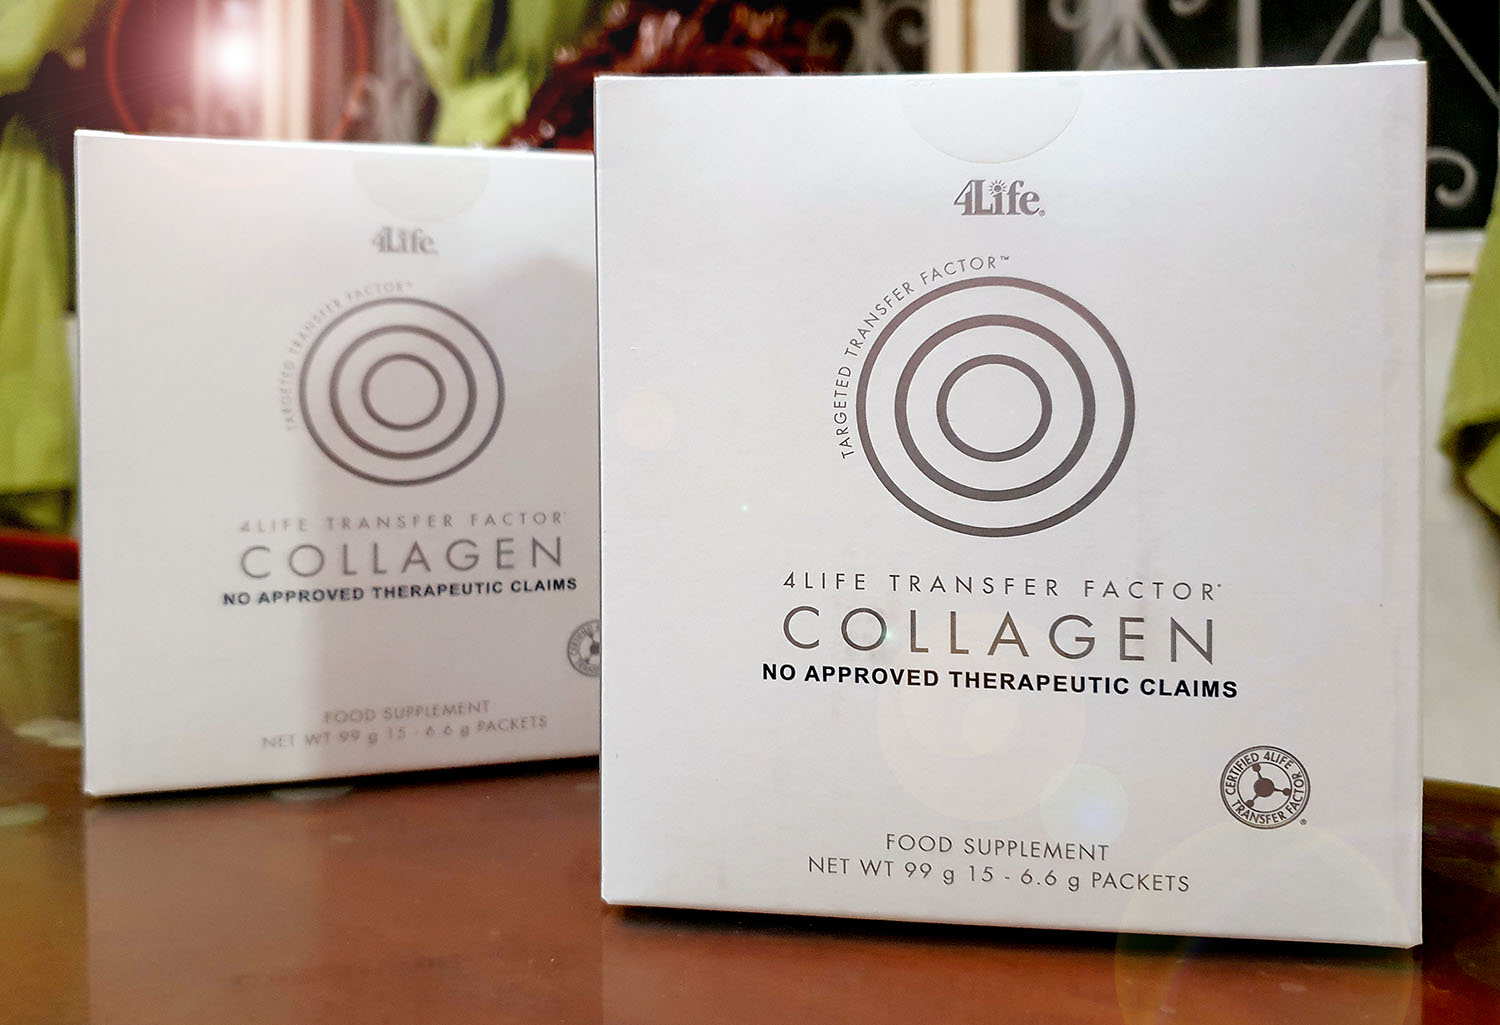 4Life Transfer Factor Collagen provides beauty and immunity